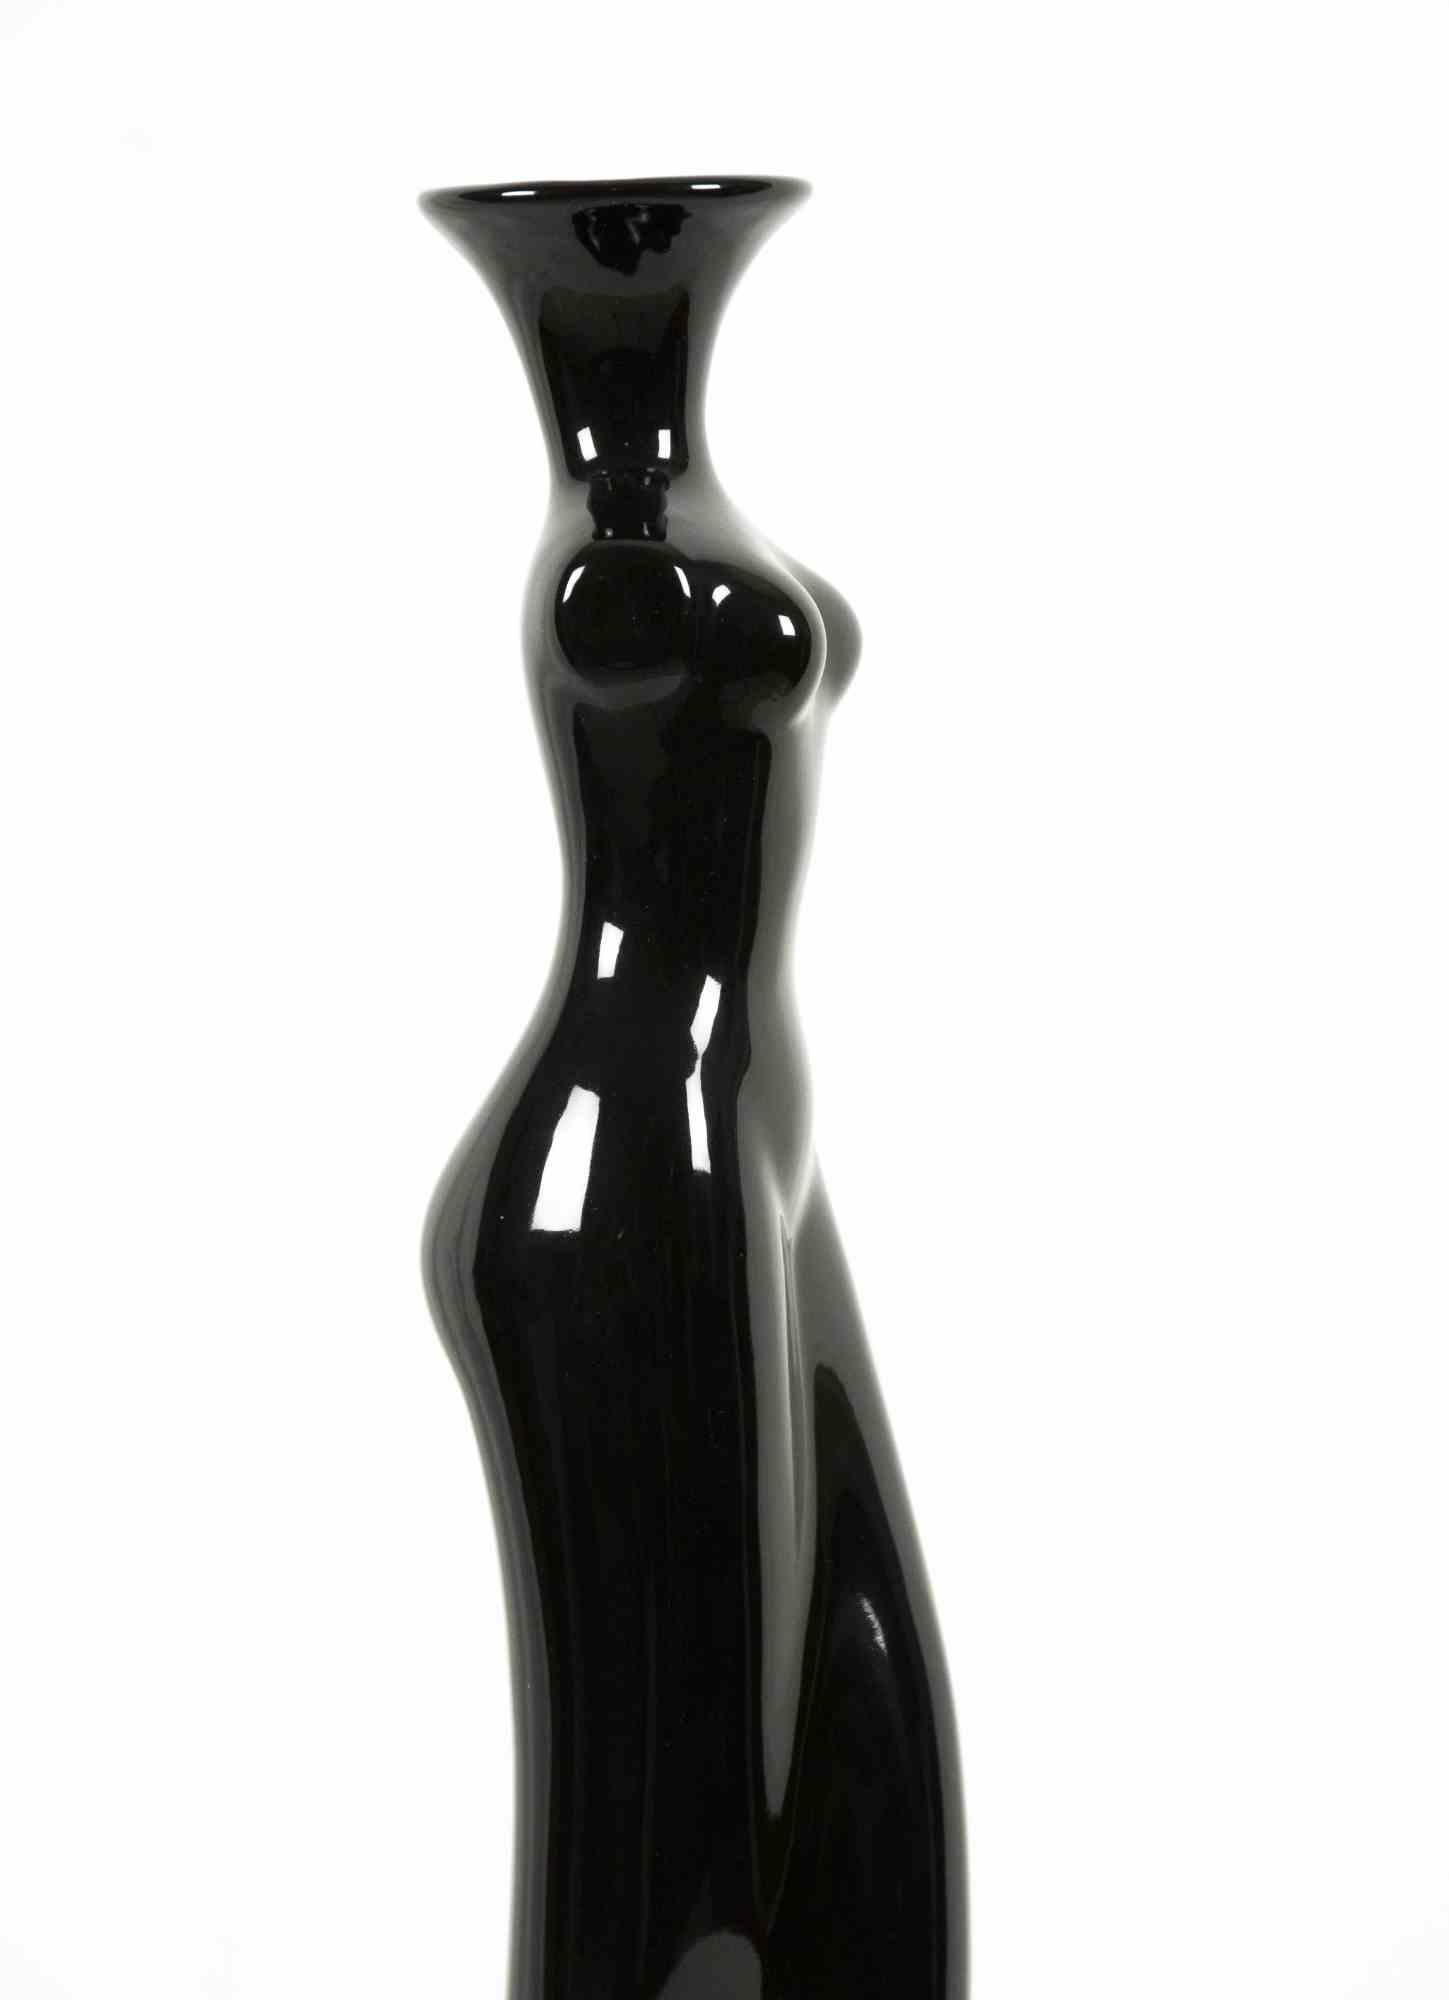 Female shape vase is an original decorative object realized in the 1970s.

Made in Italy.

Original Black Ceramics.

The vase has a female sinuous body shape and has been realized with a very bright ceramics.

Excellent conditions.